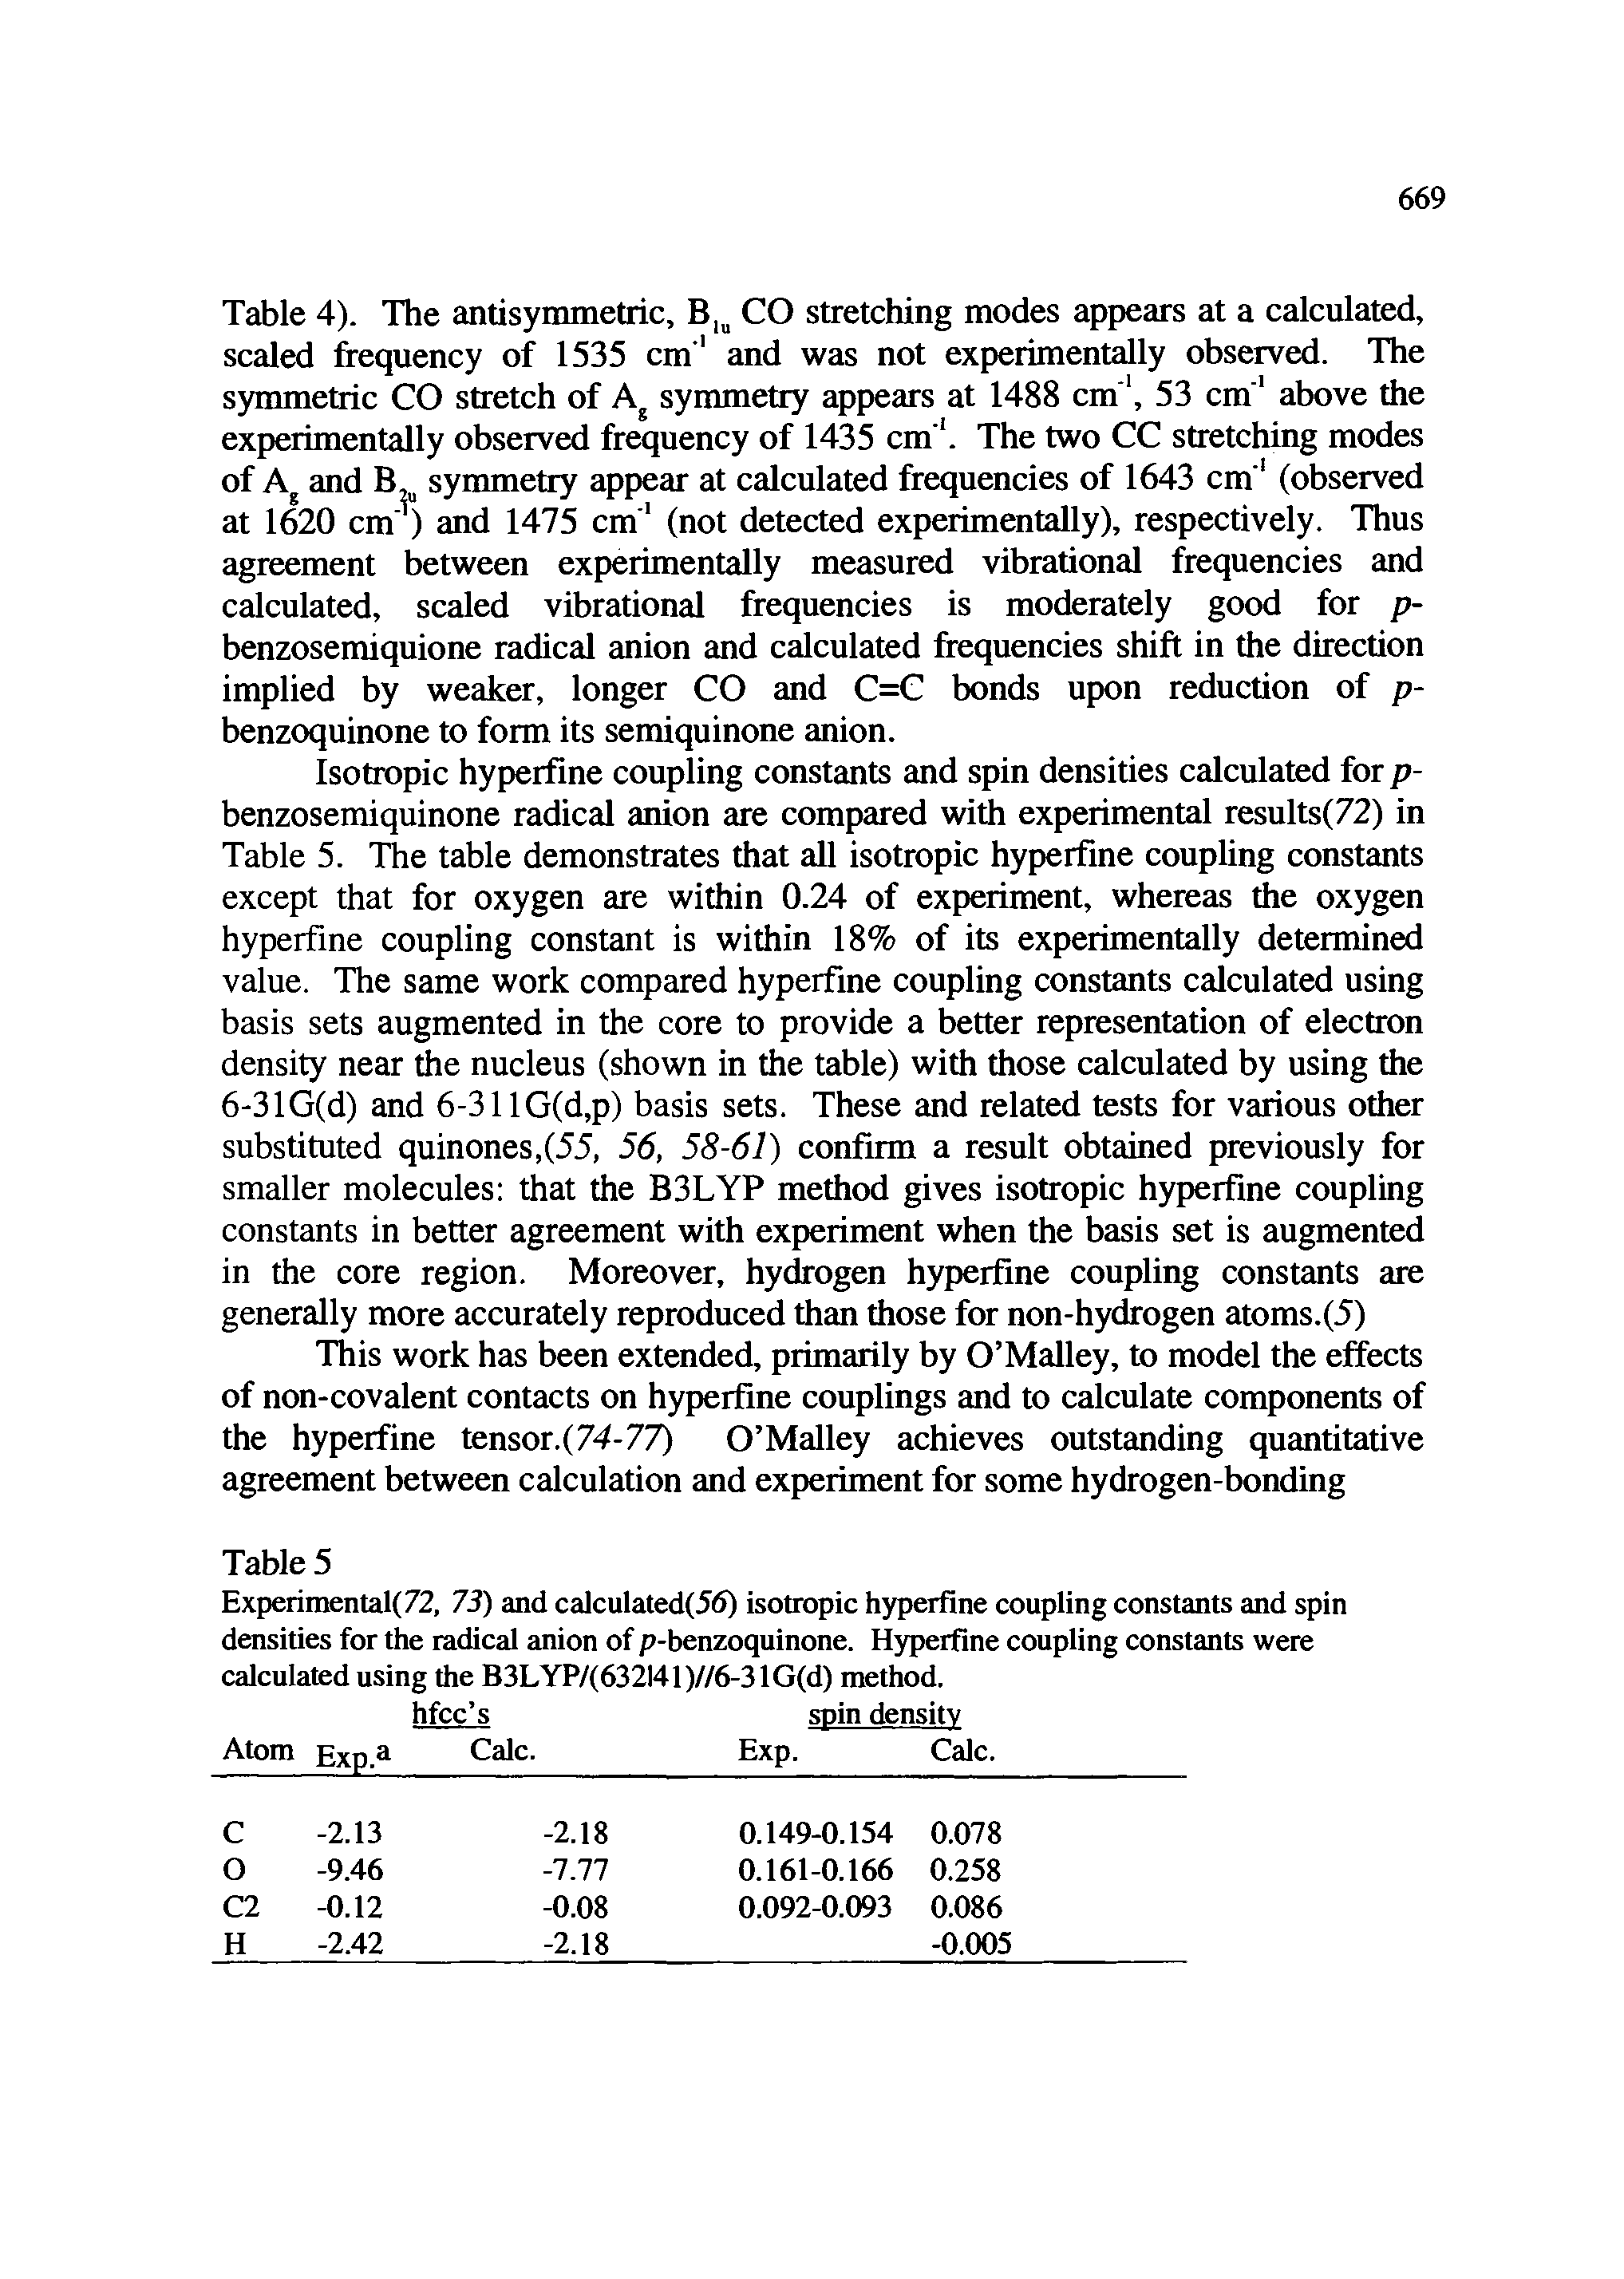 Table 4). The antisymmetric, B, CO stretching modes appears at a calculated, scaled frequency of 1535 cm and was not experimentally observed. The symmetric CO stretch of symmetry appears at 1488 cm, 53 cm above the experimentally observed frequency of 1435 cm. The two CC stretching modes of Aj and B. symmetry appear at calculated frequencies of 1643 cm (observed at 1620 cm and 1475 cm (not detected experimentally), respectively. Thus agreement between experimentally measured vibrational frequencies and calculated, scaled vibrational frequencies is moderately good for p-benzosemiquione radical anion and calculated frequencies shift in the direction implied by weaker, longer CO and C=C bonds upon reduction of p-benzoquinone to form its semiquinone anion.